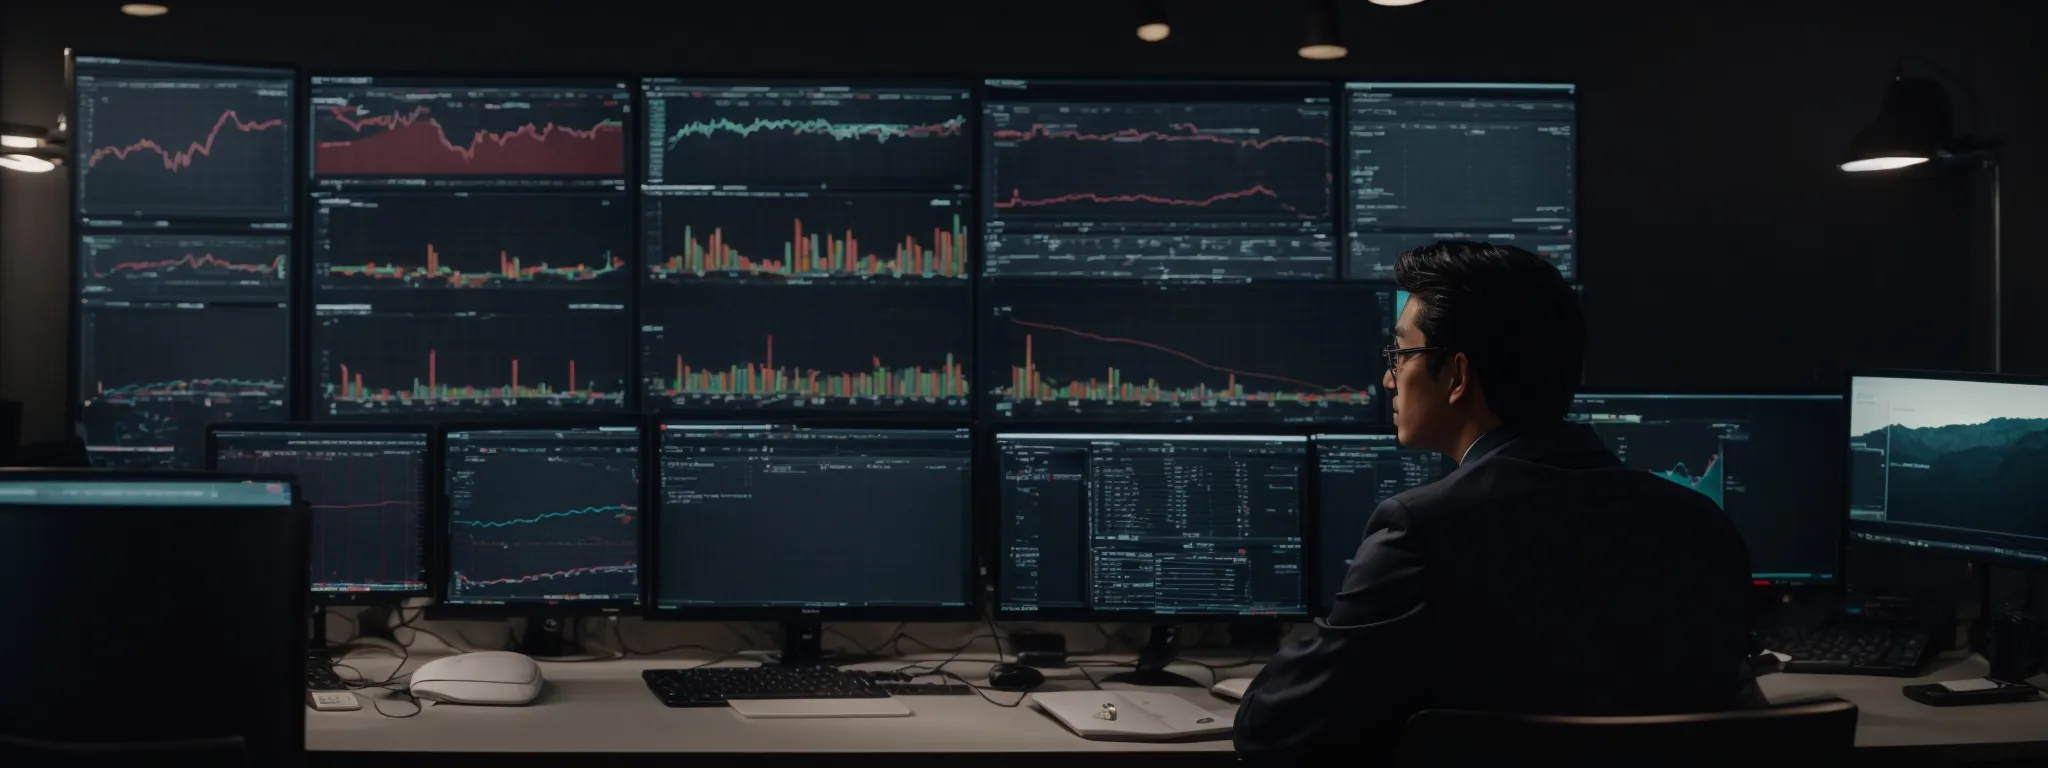 a marketer sits before a row of monitors displaying various graphs and analytics dashboards.